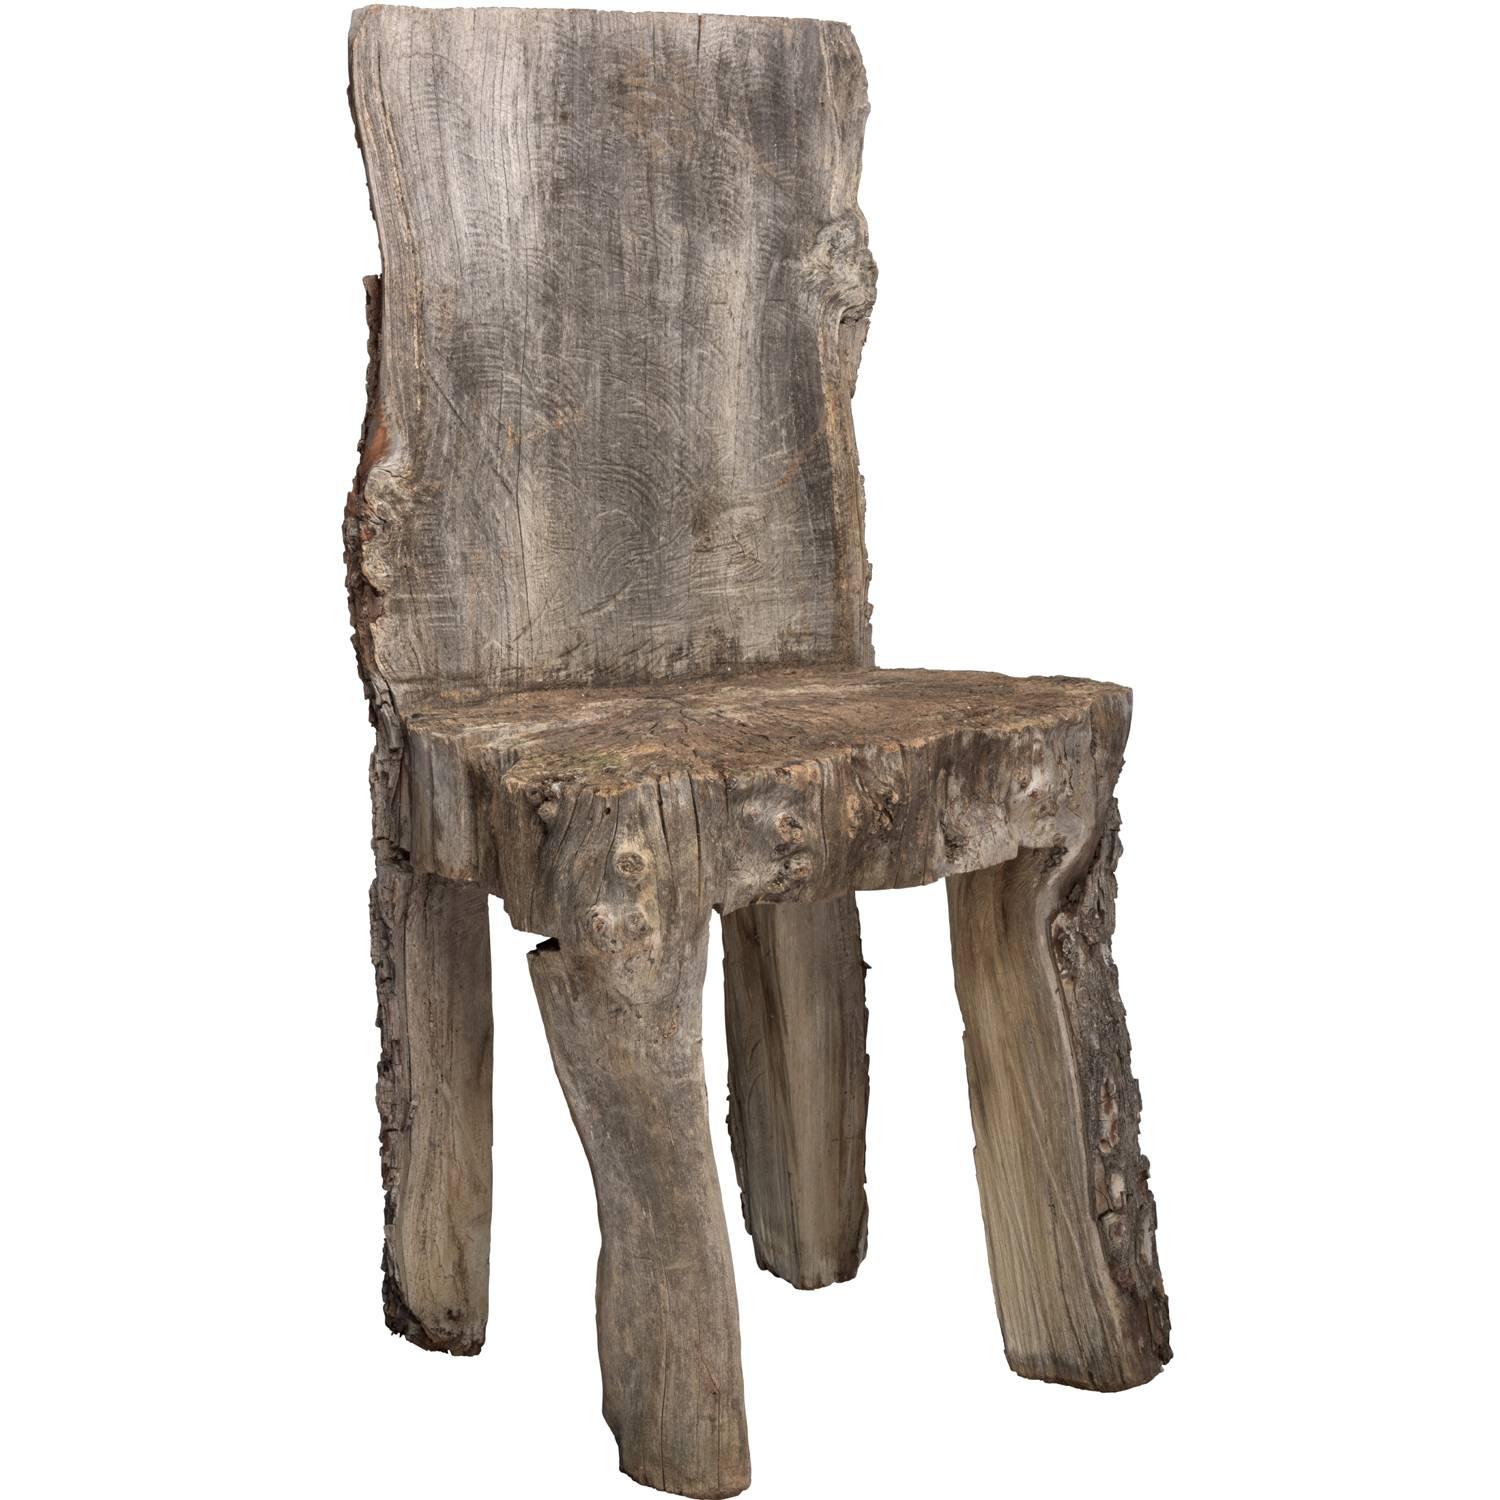 Primitive Wooden Hall Chair